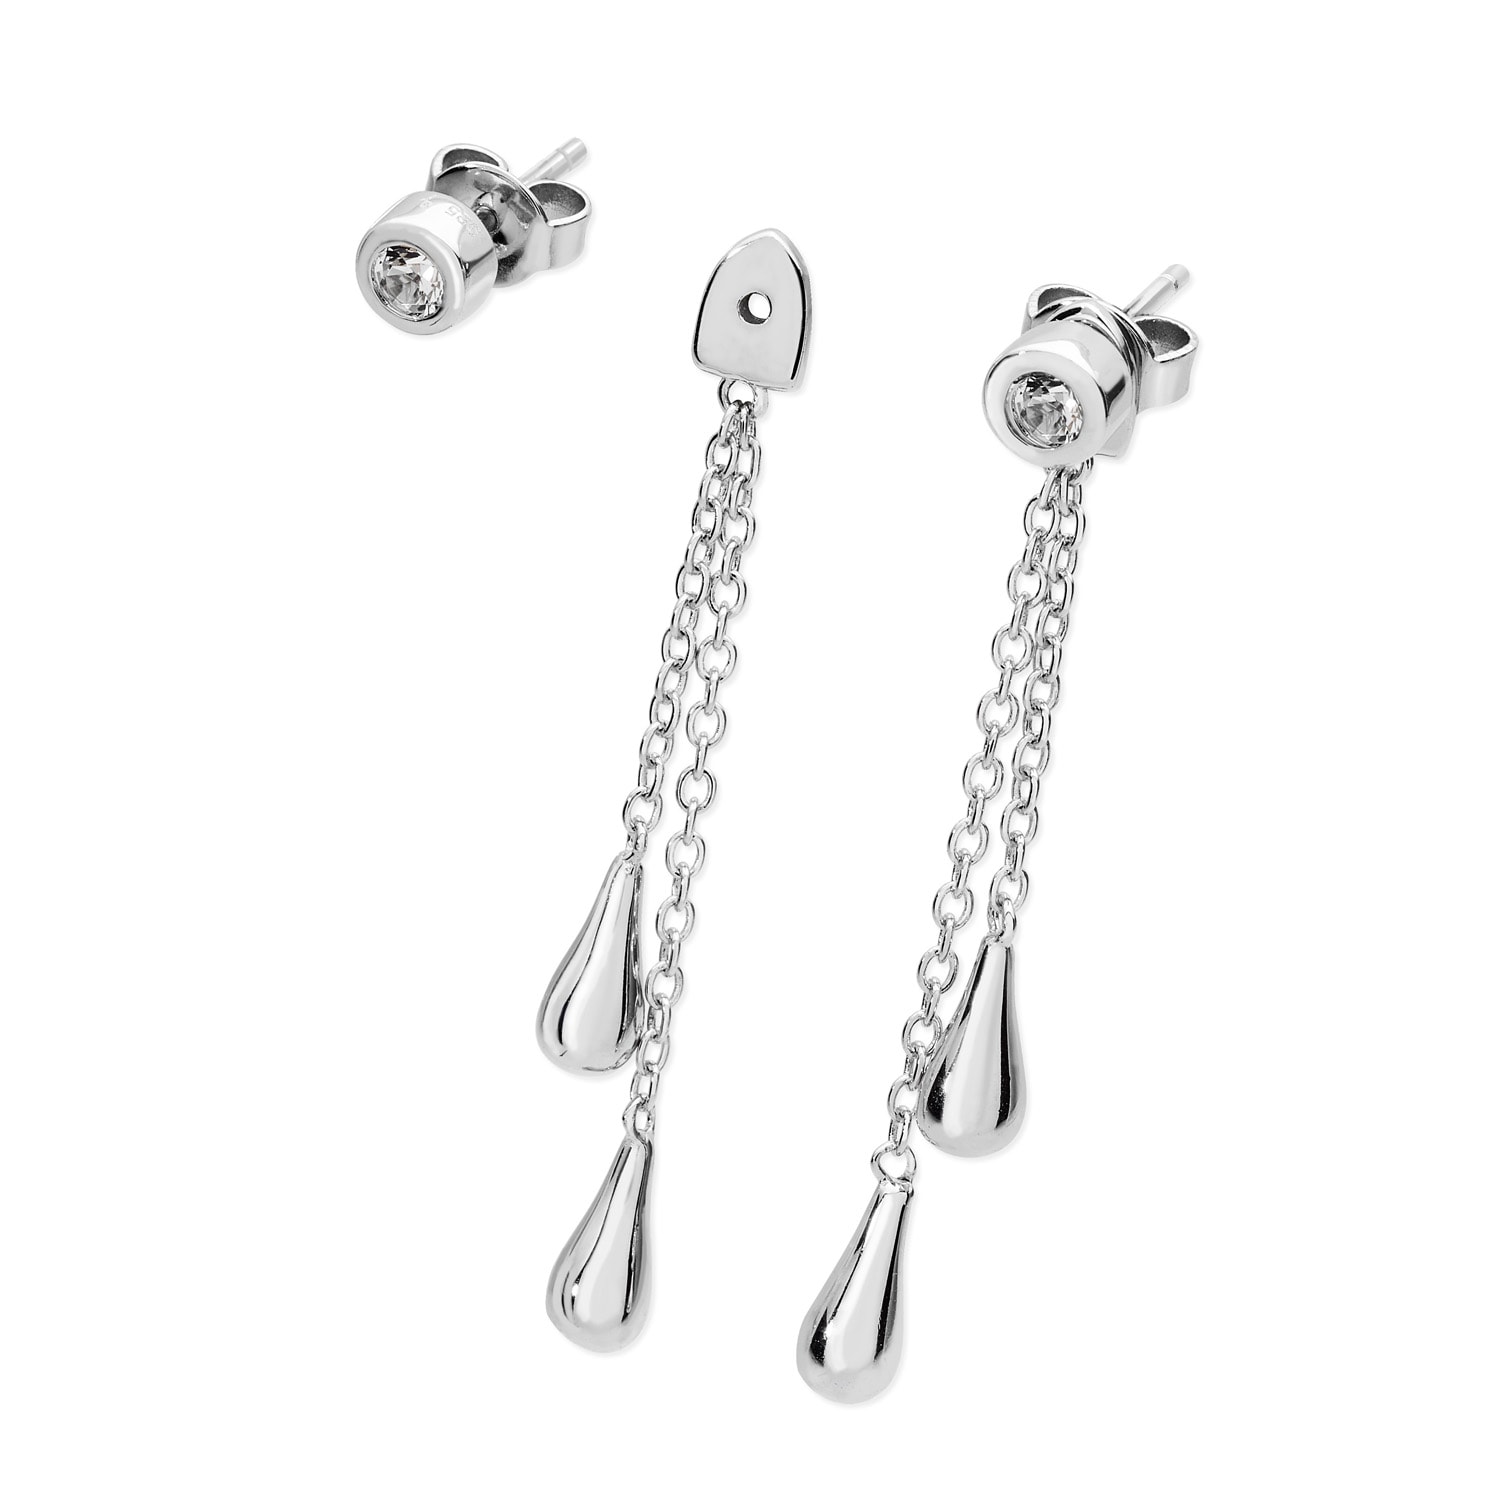 Lucy Quartermaine Women's Silver Removable Double Drop Earrings With White Topaz